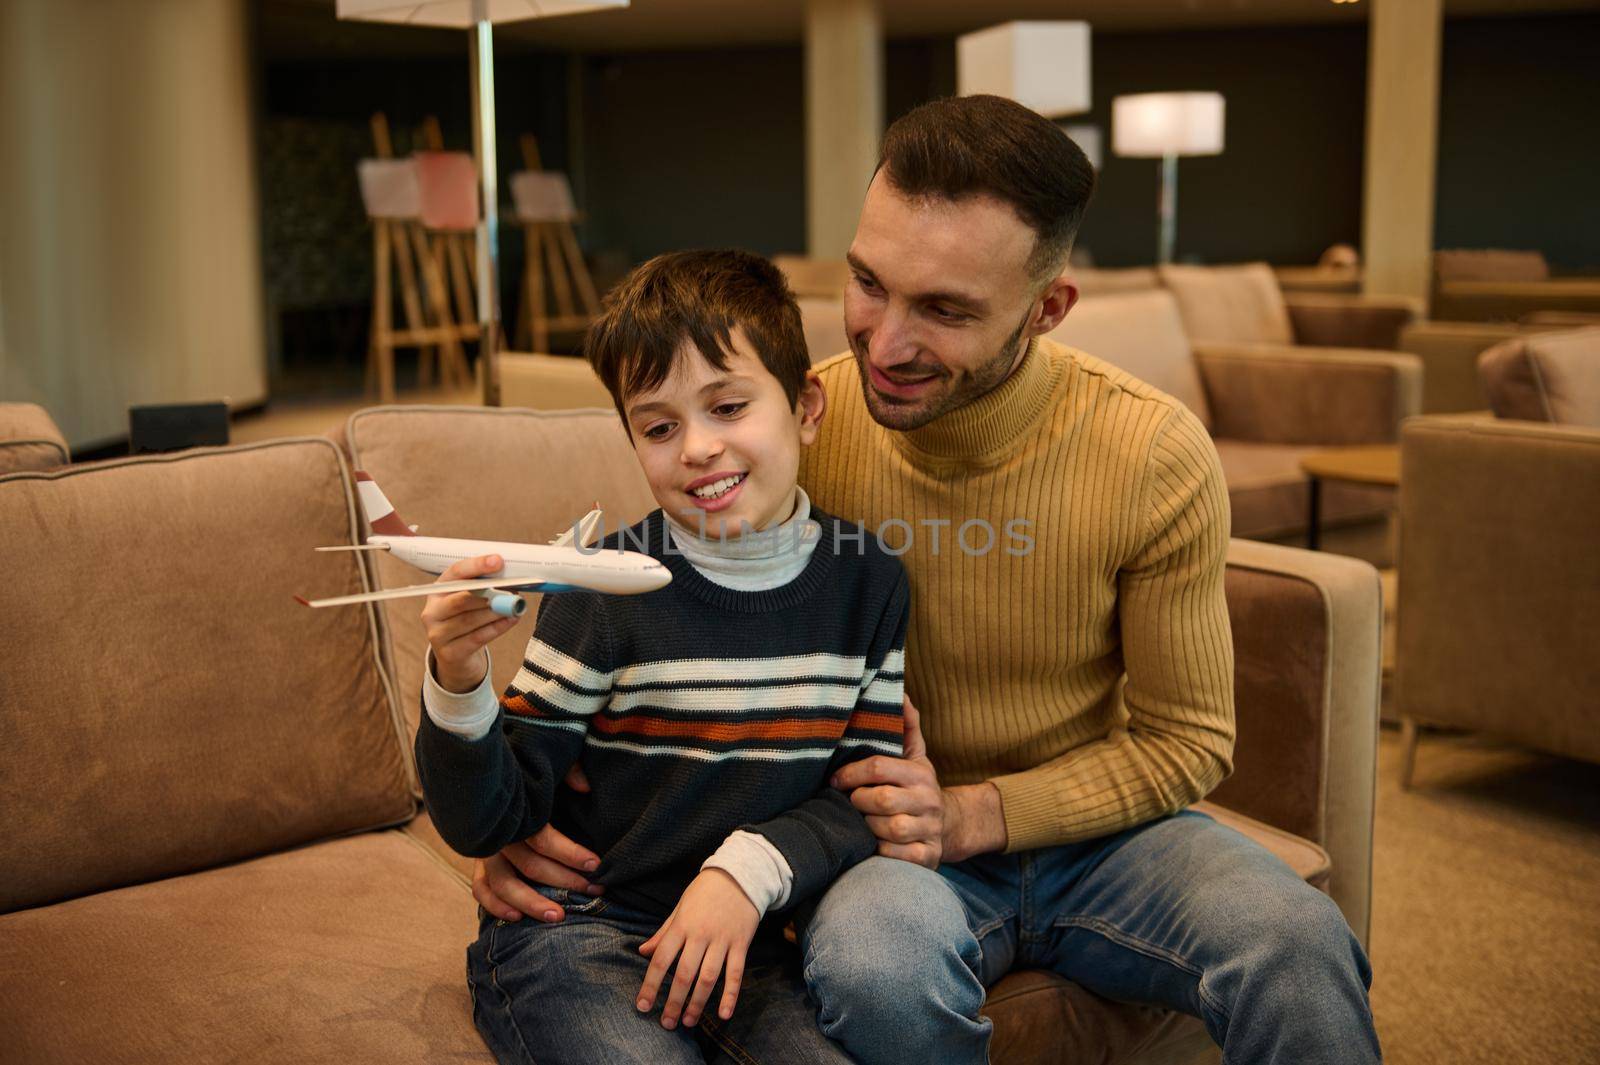 Adorable boy plays with toy plane while his young loving father sits next to him, hugs him while waiting for boarding a flight in the VIP lounge of the departure terminal of the international airport by artgf